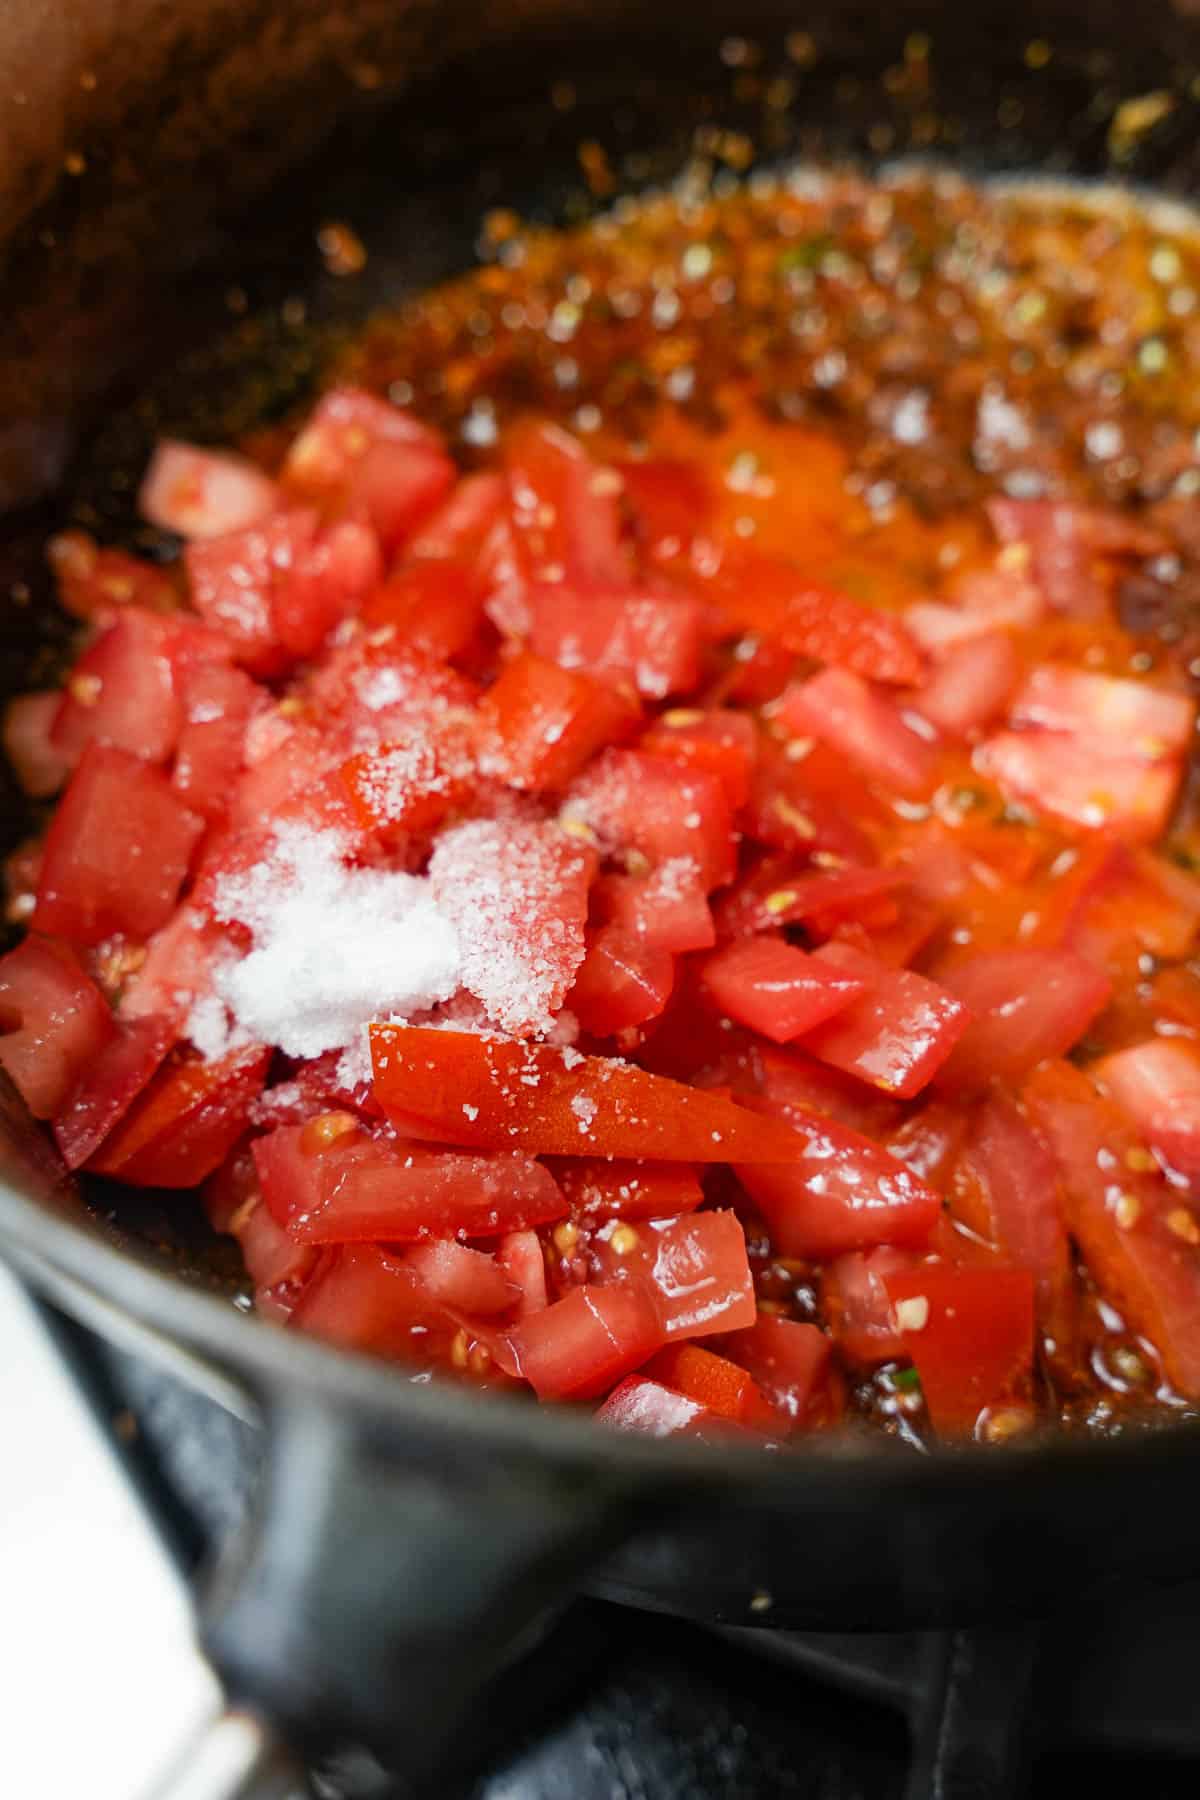 tomatoes and salt are added to the cooking spices and veggies in the pan.